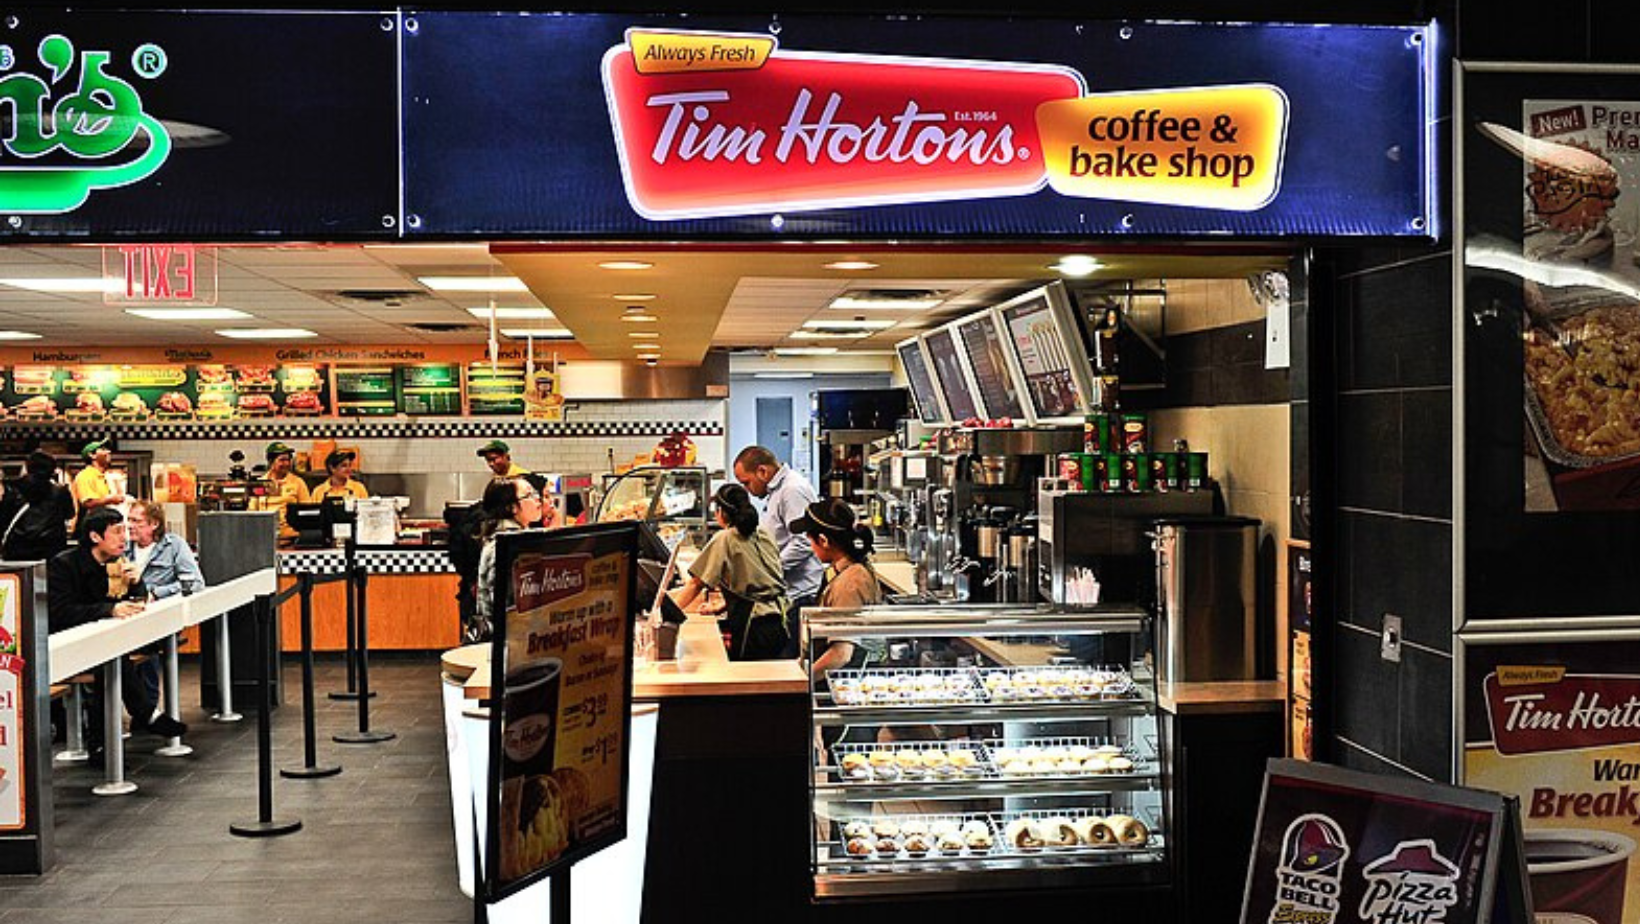 Retail News: Tim Hortons opens second Houston location this Friday